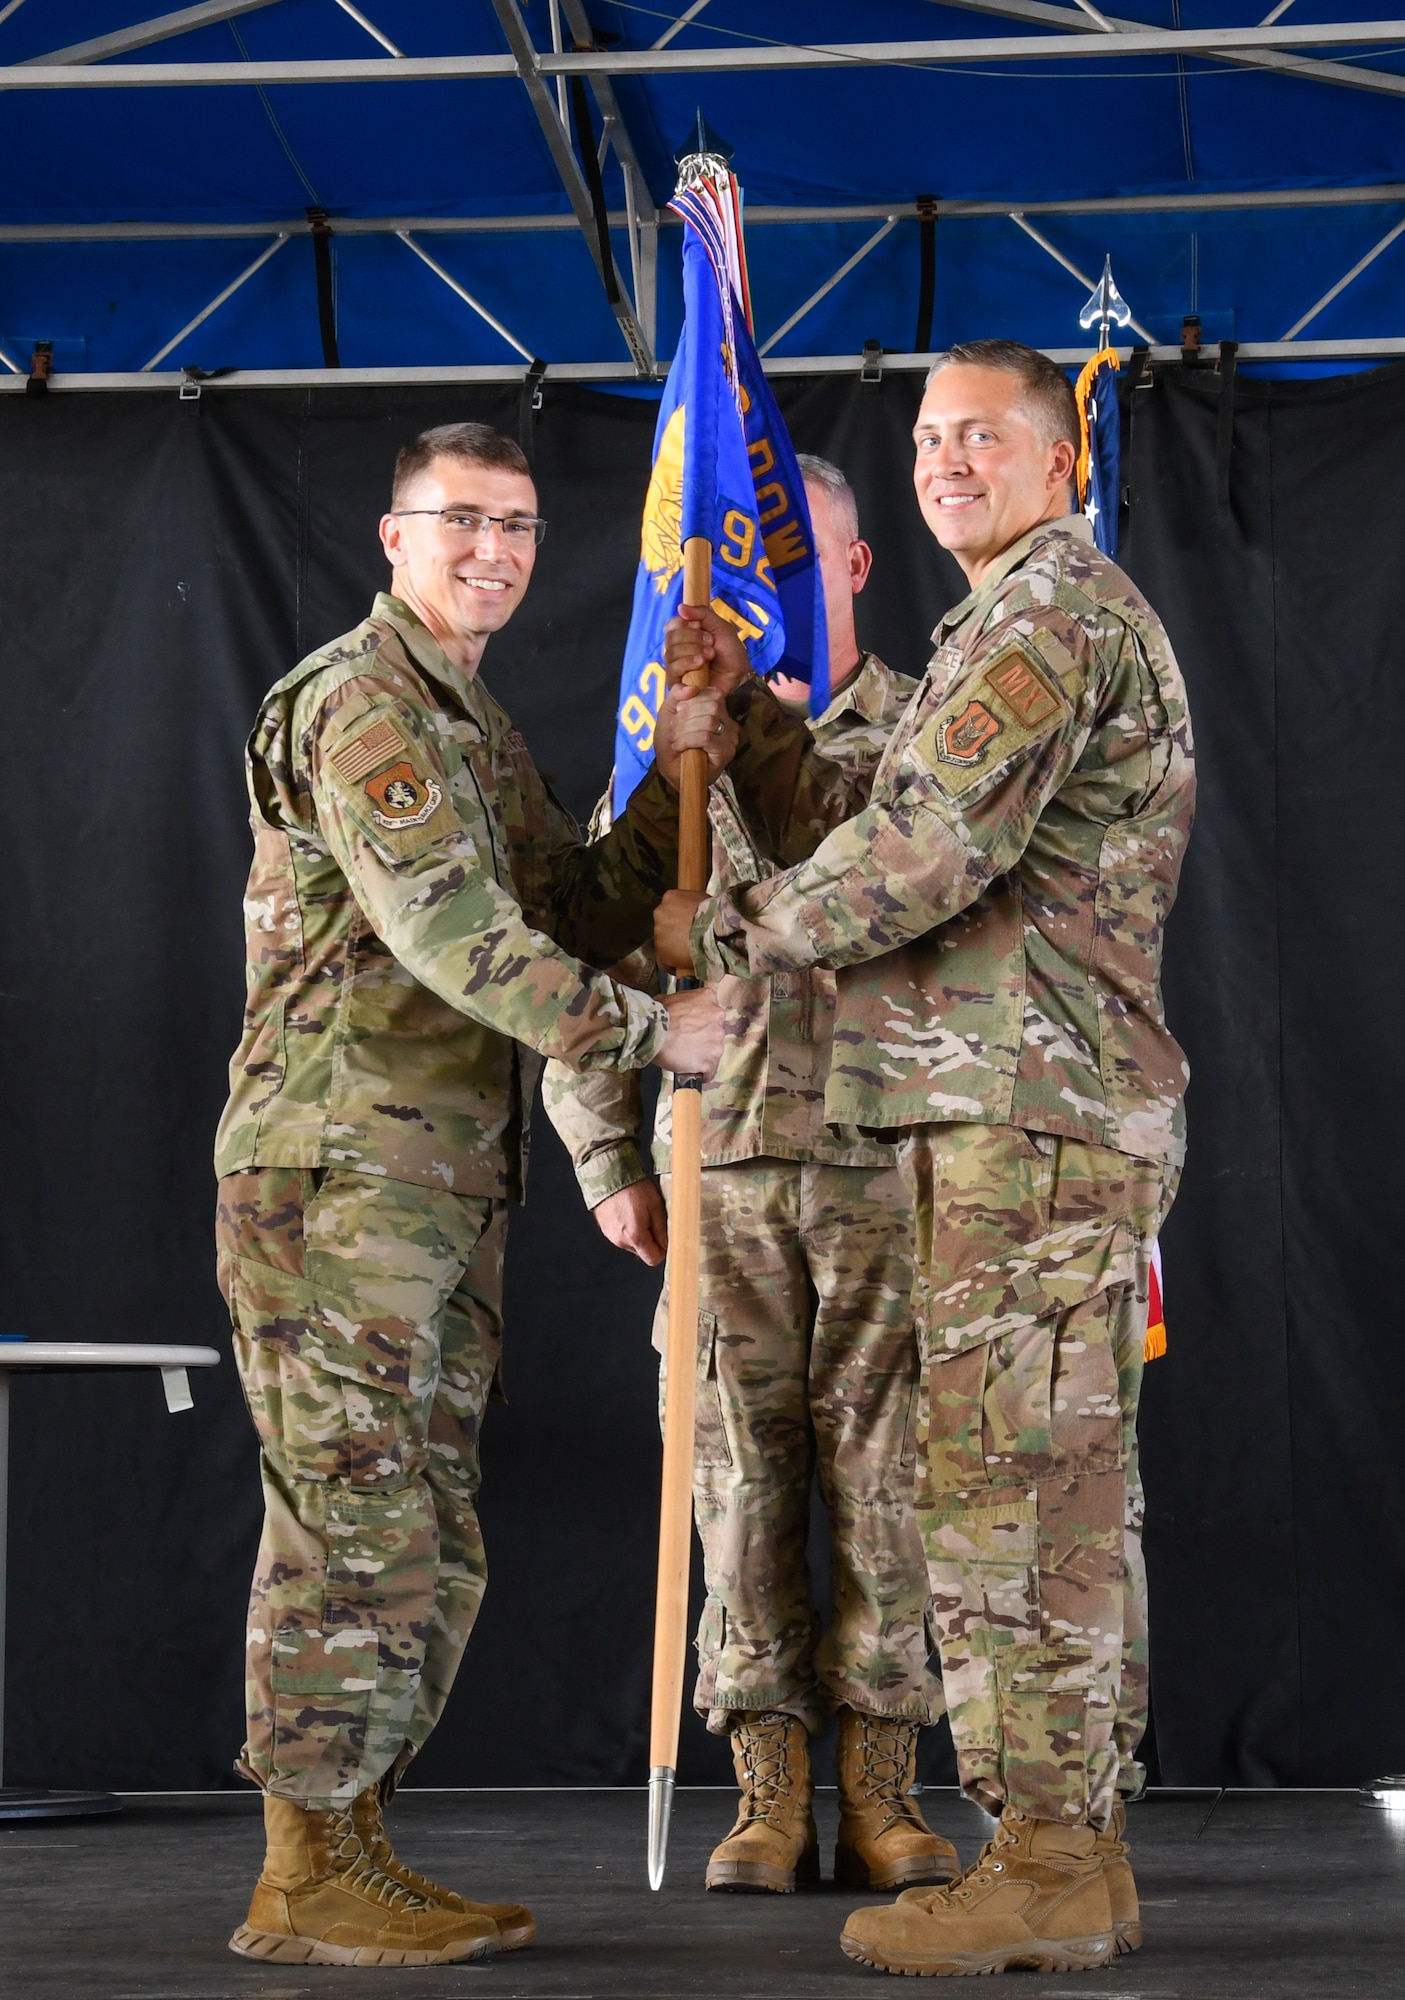 Col. George Cole, 920th Maintenance Group commander, presents a guidon to Maj. Jonathan Crocker, 920th Aircraft Maintenance Squadron commander, during a change of command ceremony here July 9. The 920th AMXS oversees maintenance for the wing’s 10 HH-60G Pave Hawk helicopters. (U.S. Air Force photo by Staff Sgt. Darius Sostre-Miroir)